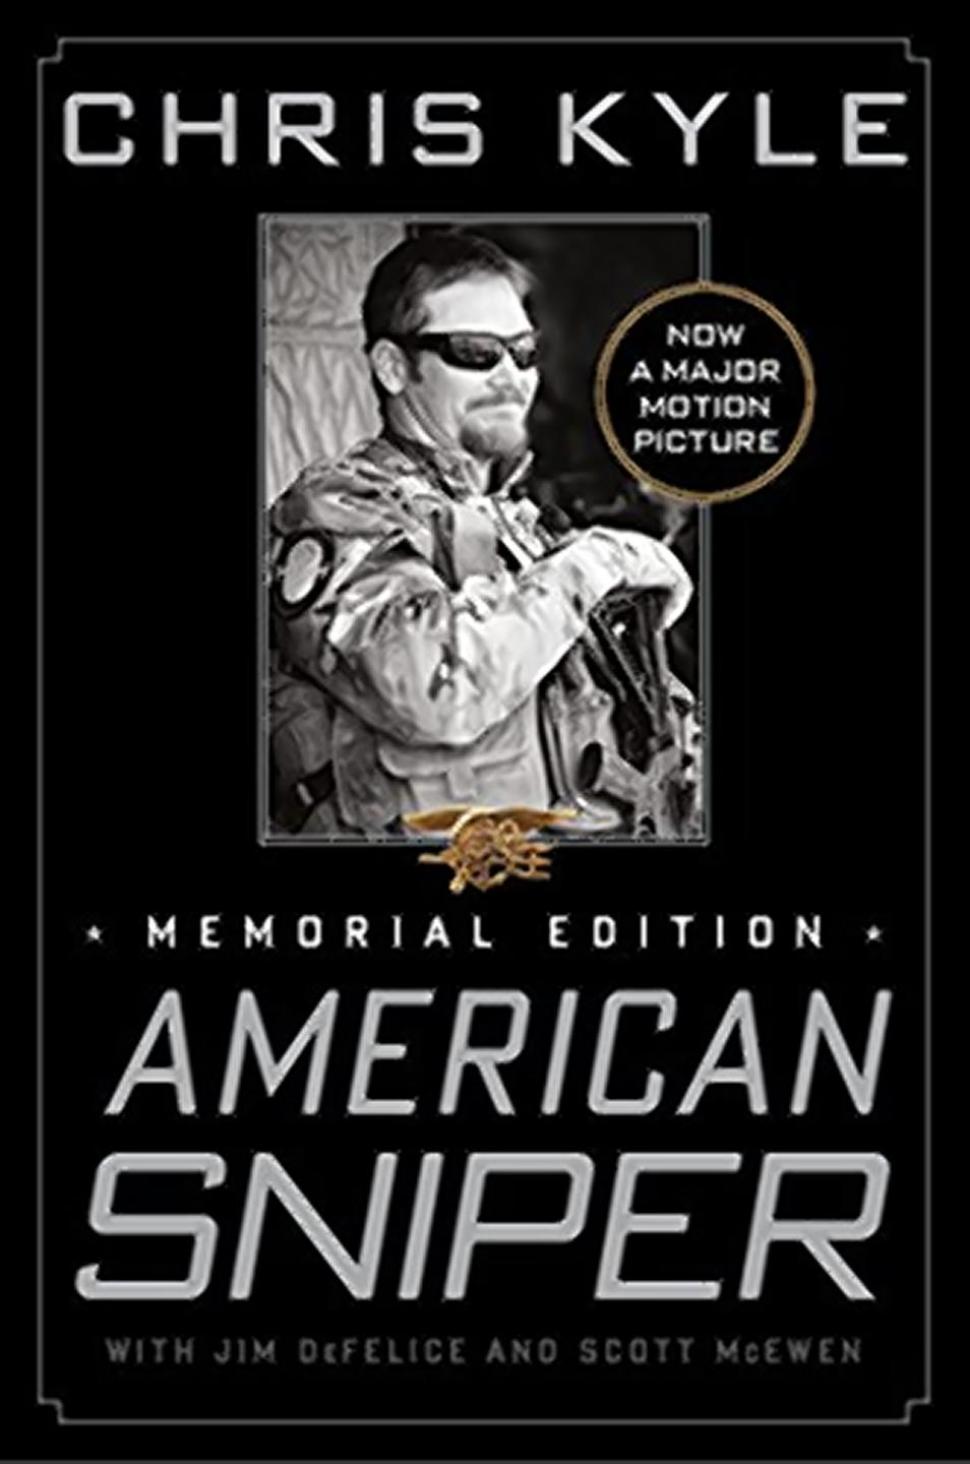 According to DeFelice, who helped co-write the 'American Sniper' book, said Kyle 'had no regrets about fighting. He was a warrior.'